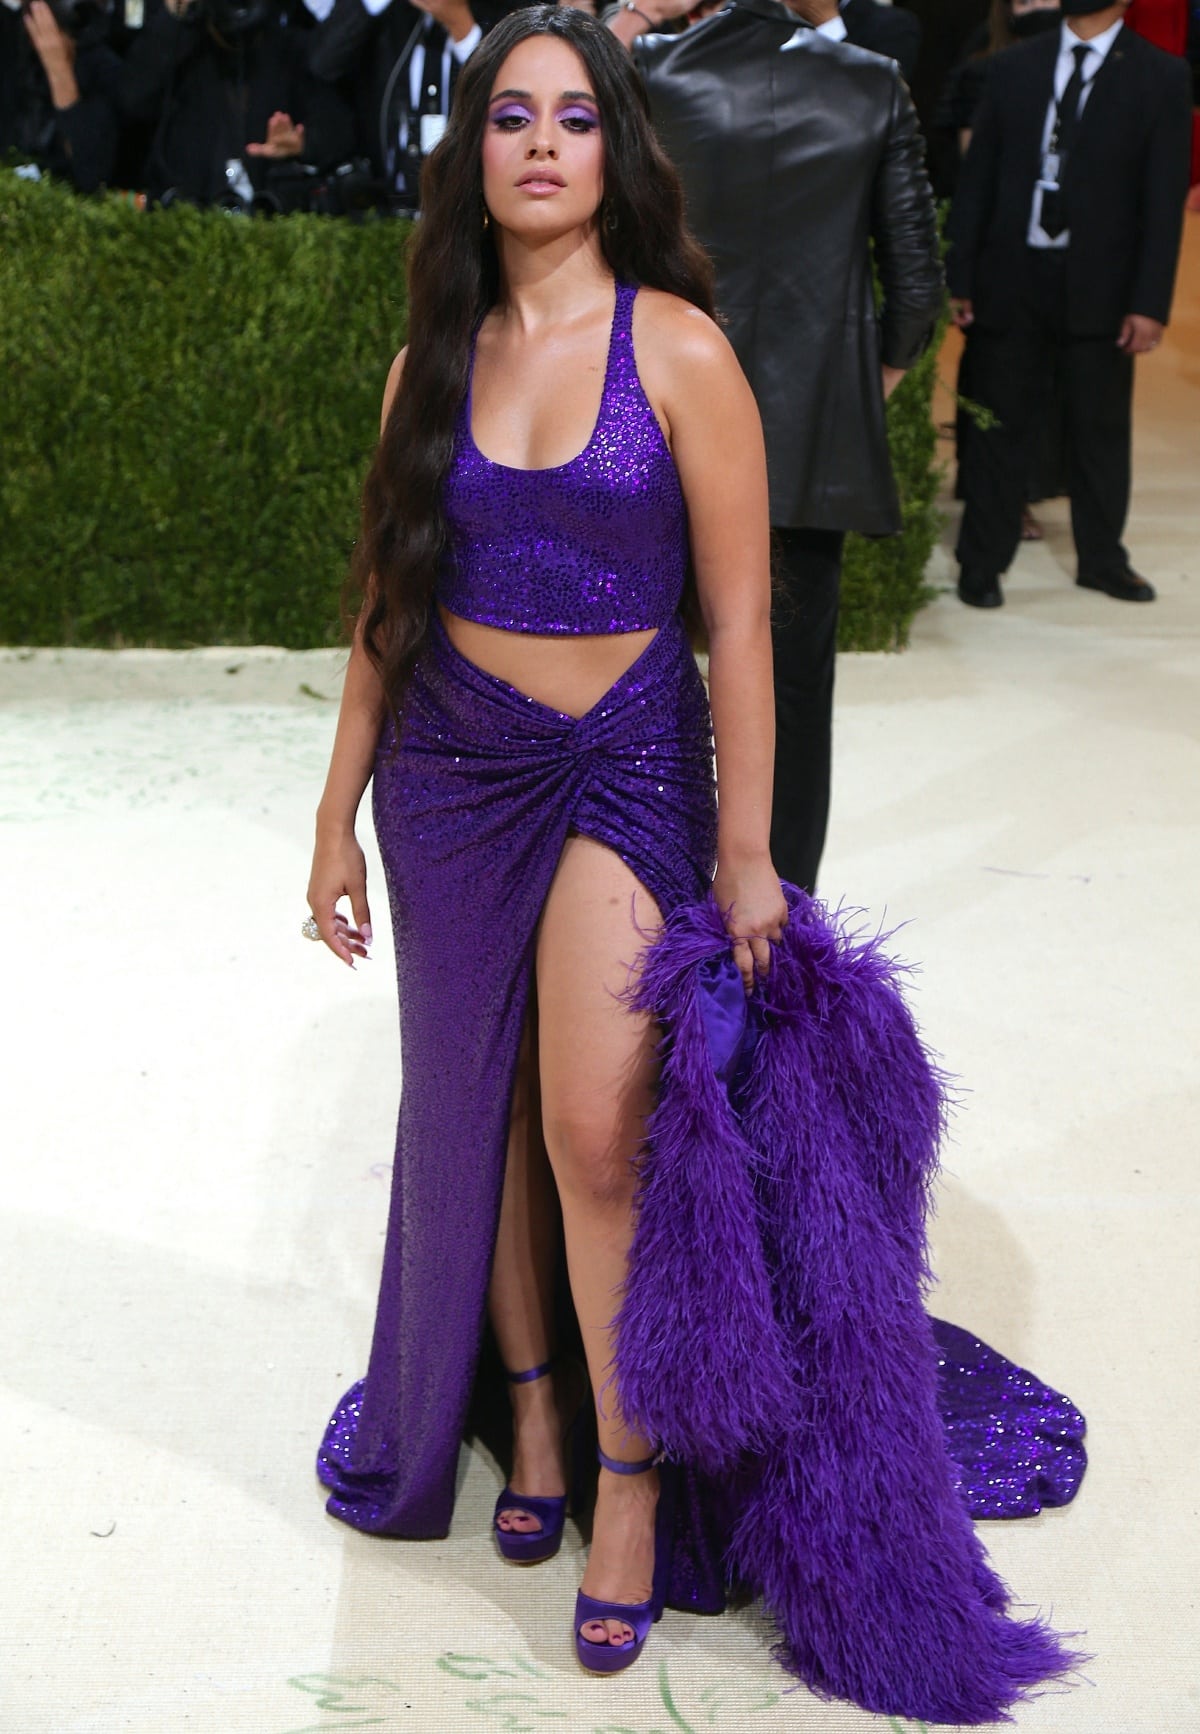 Camila Cabello wearing a cleavage-baring crop top, a matching floor-sweeping skirt with a thigh-high slit, and high platform heels at the 2021 Met Gala